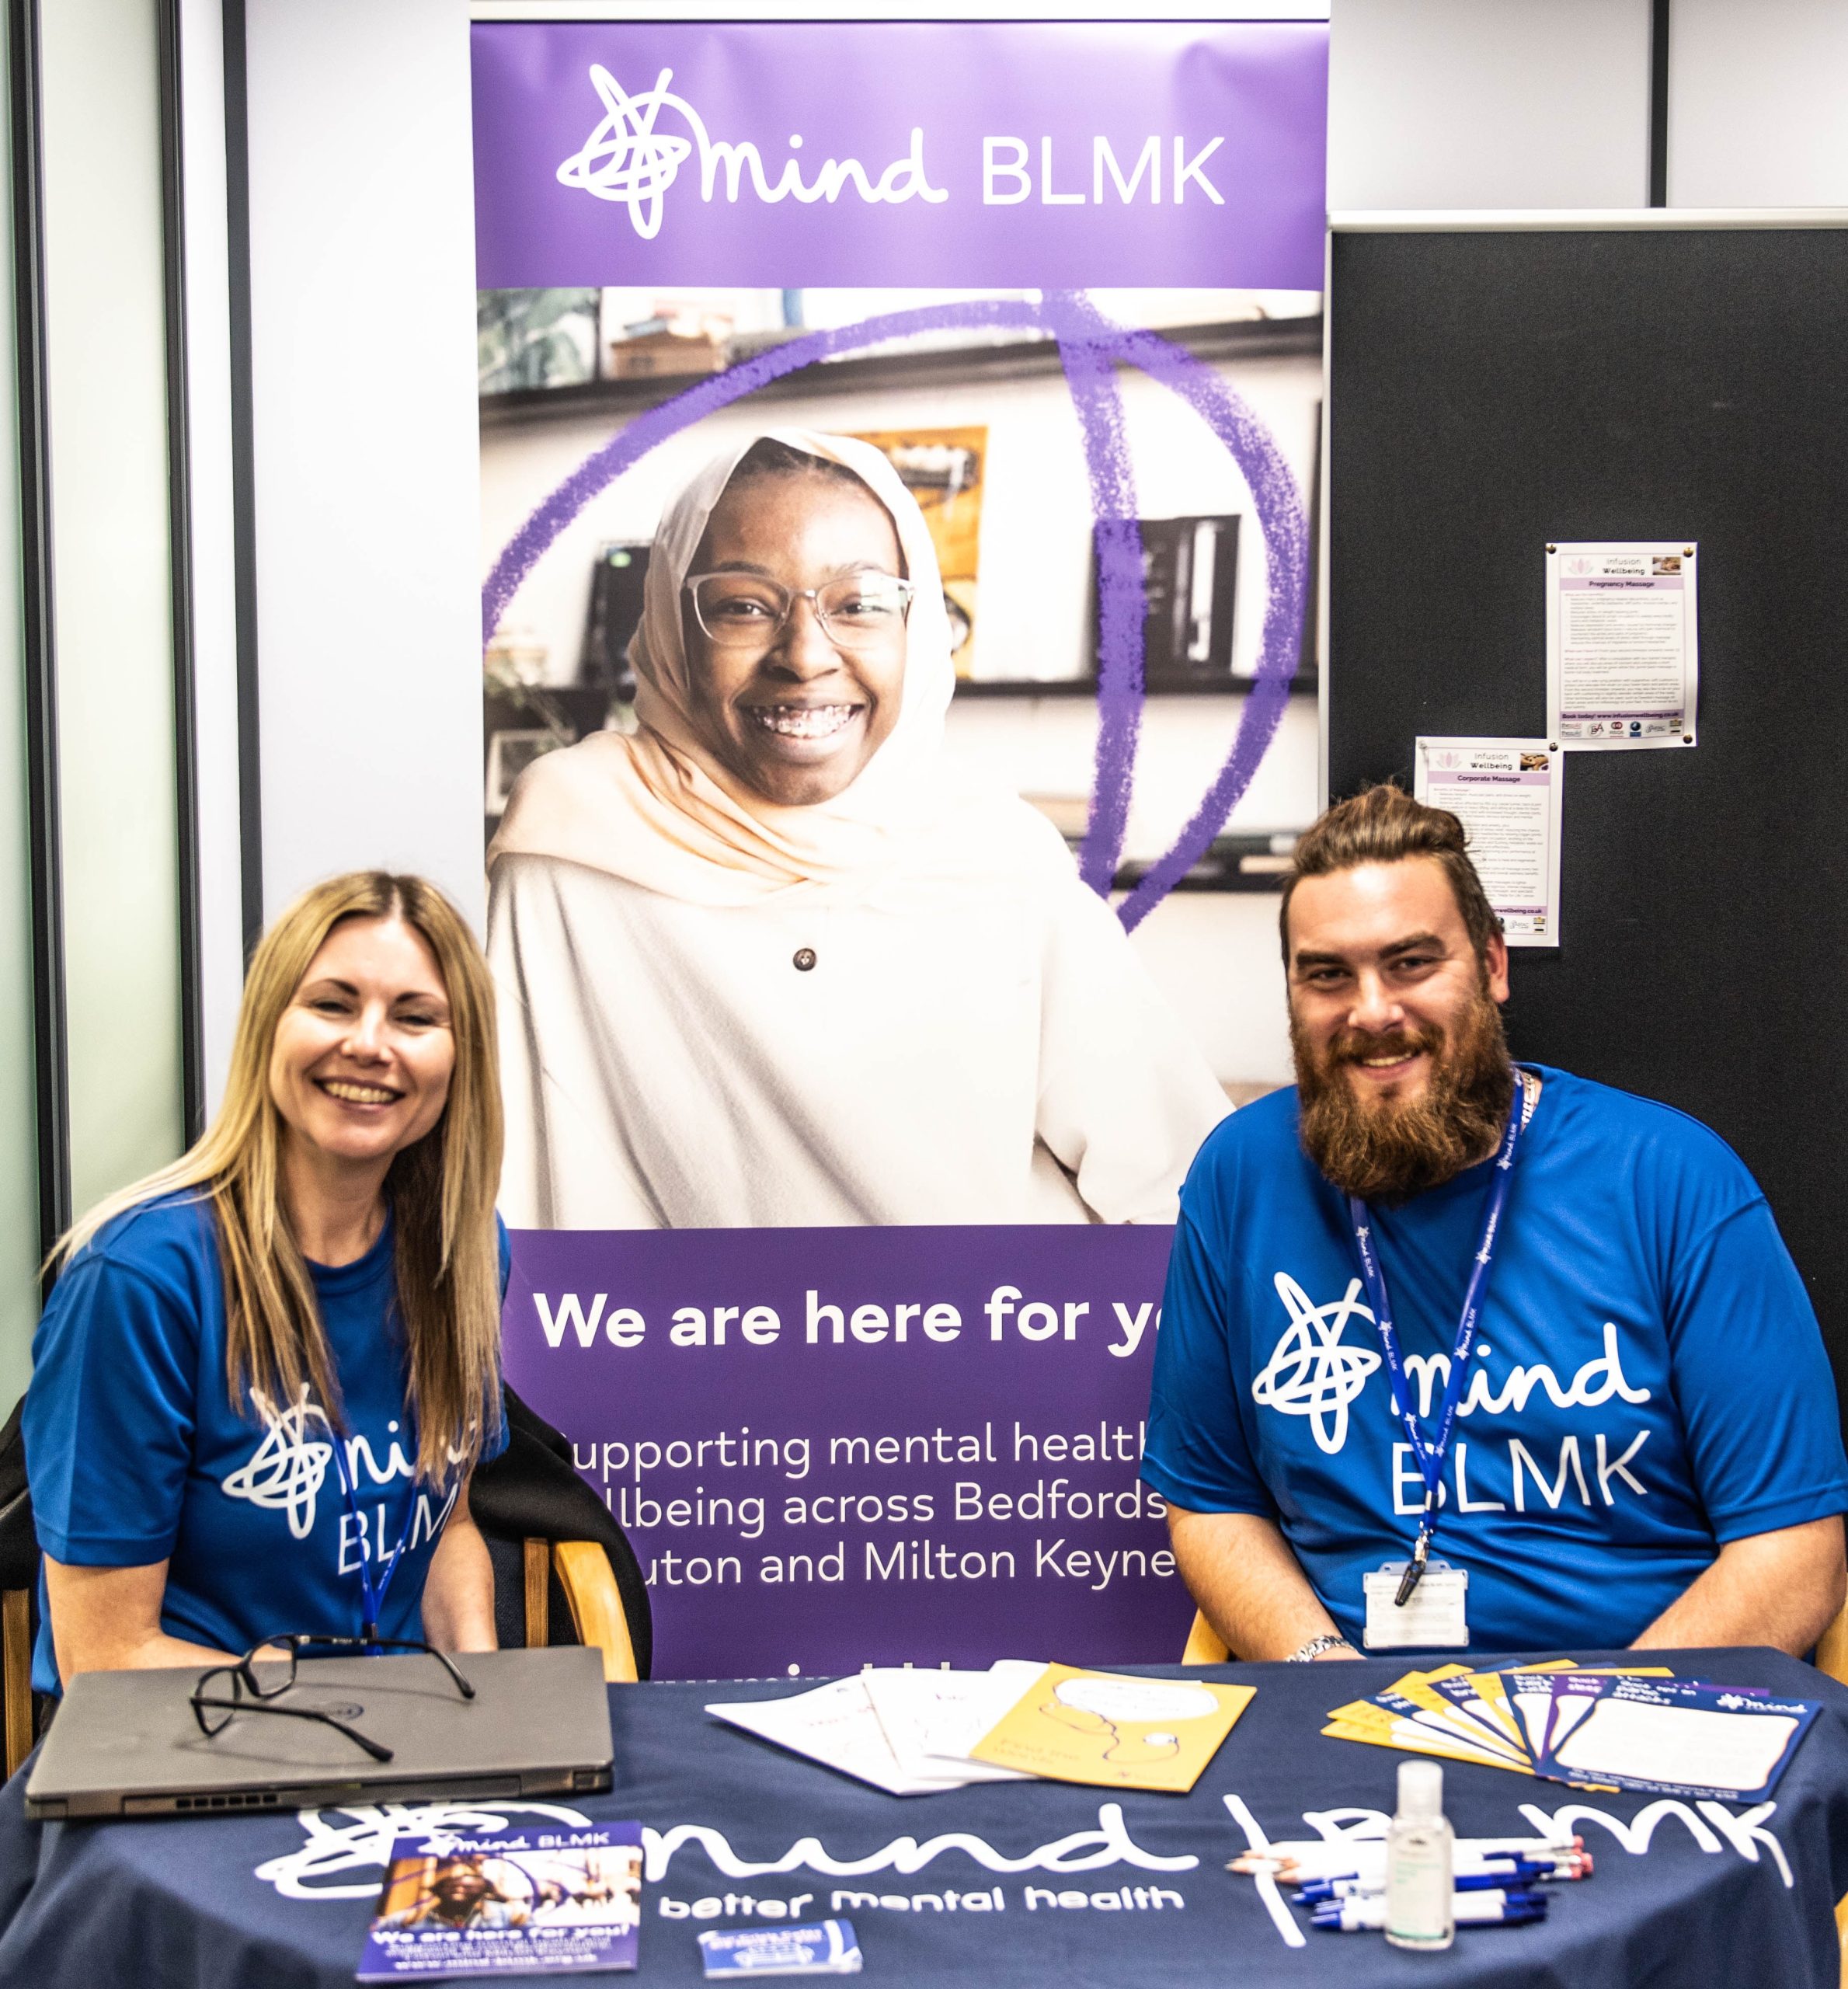 Everyone has a story – the theme this year for the Mind BLMK 2021 AGM